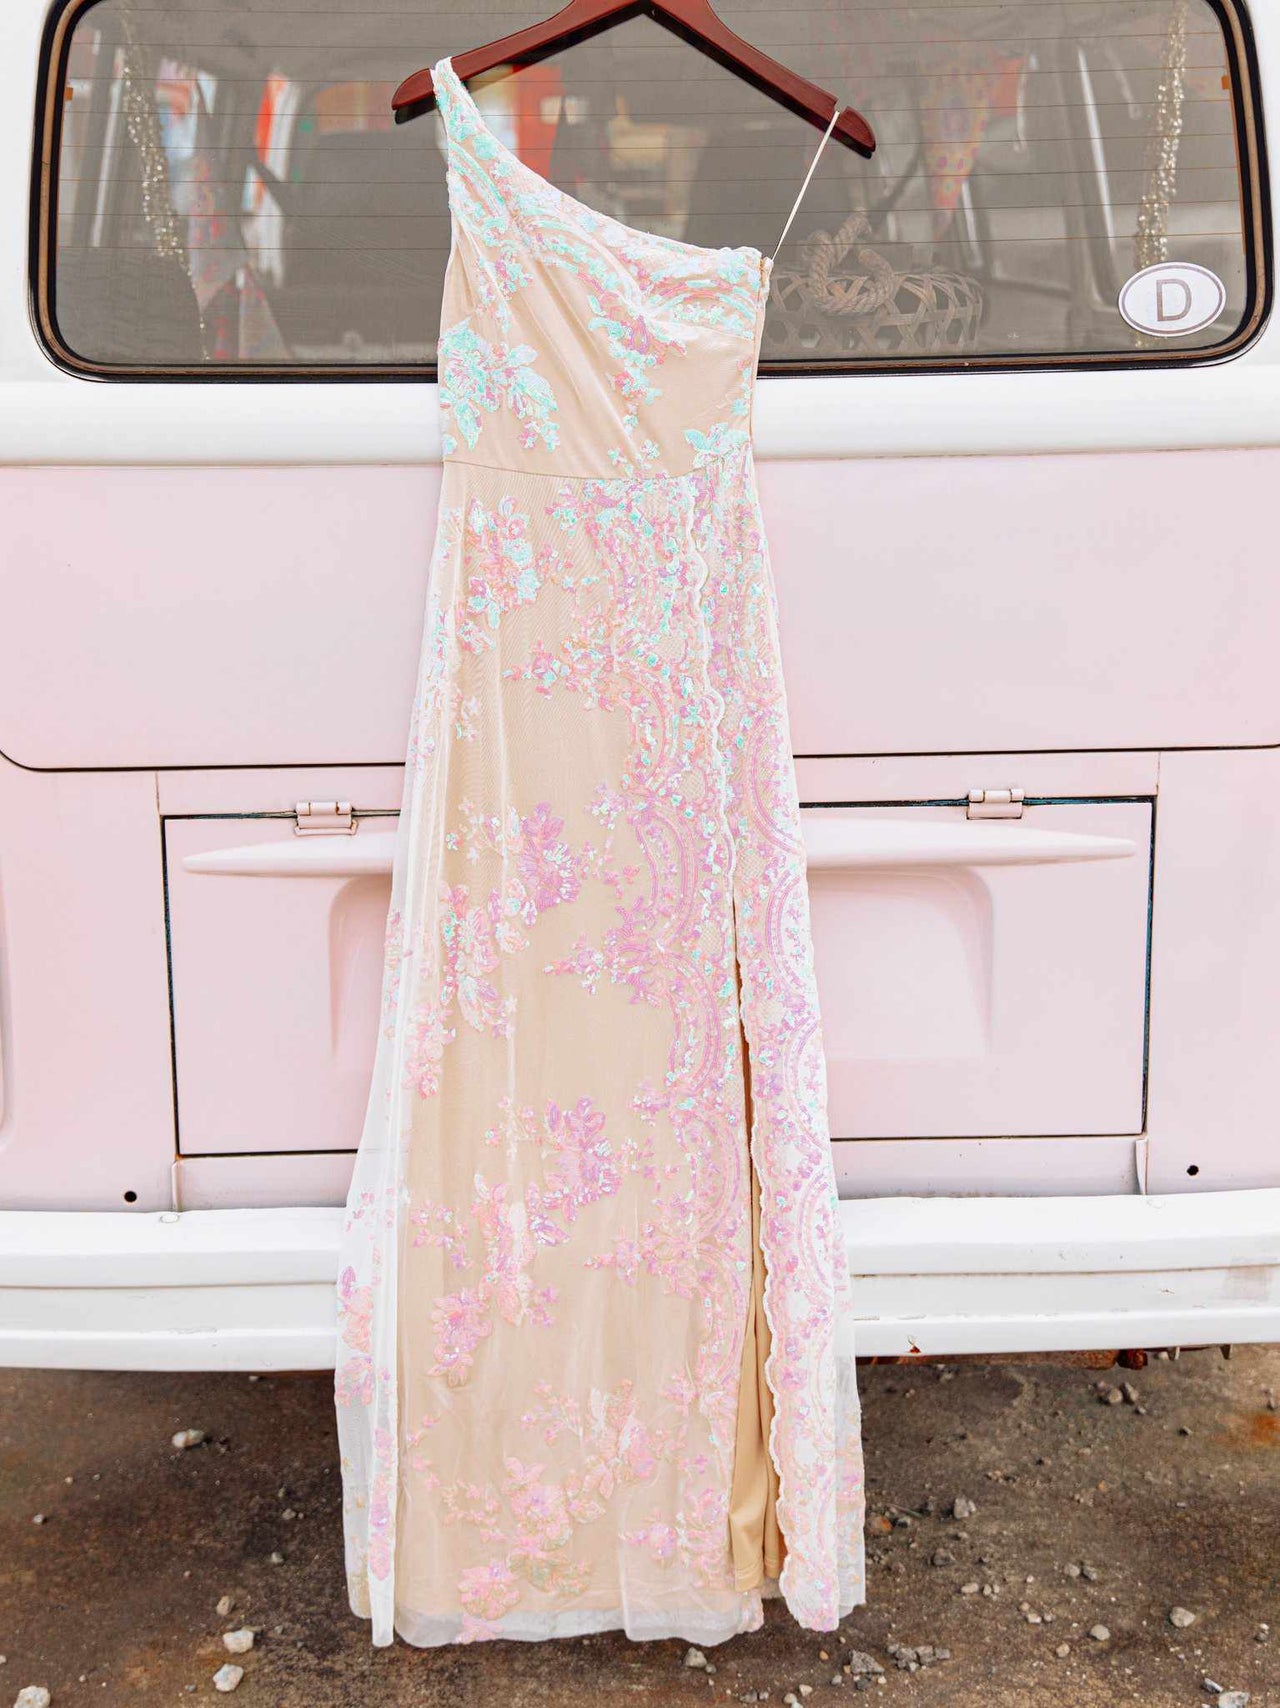 Hollywood Nights Sequin Dress - Pink Iridescent-Dresses-Southern Fried Chics